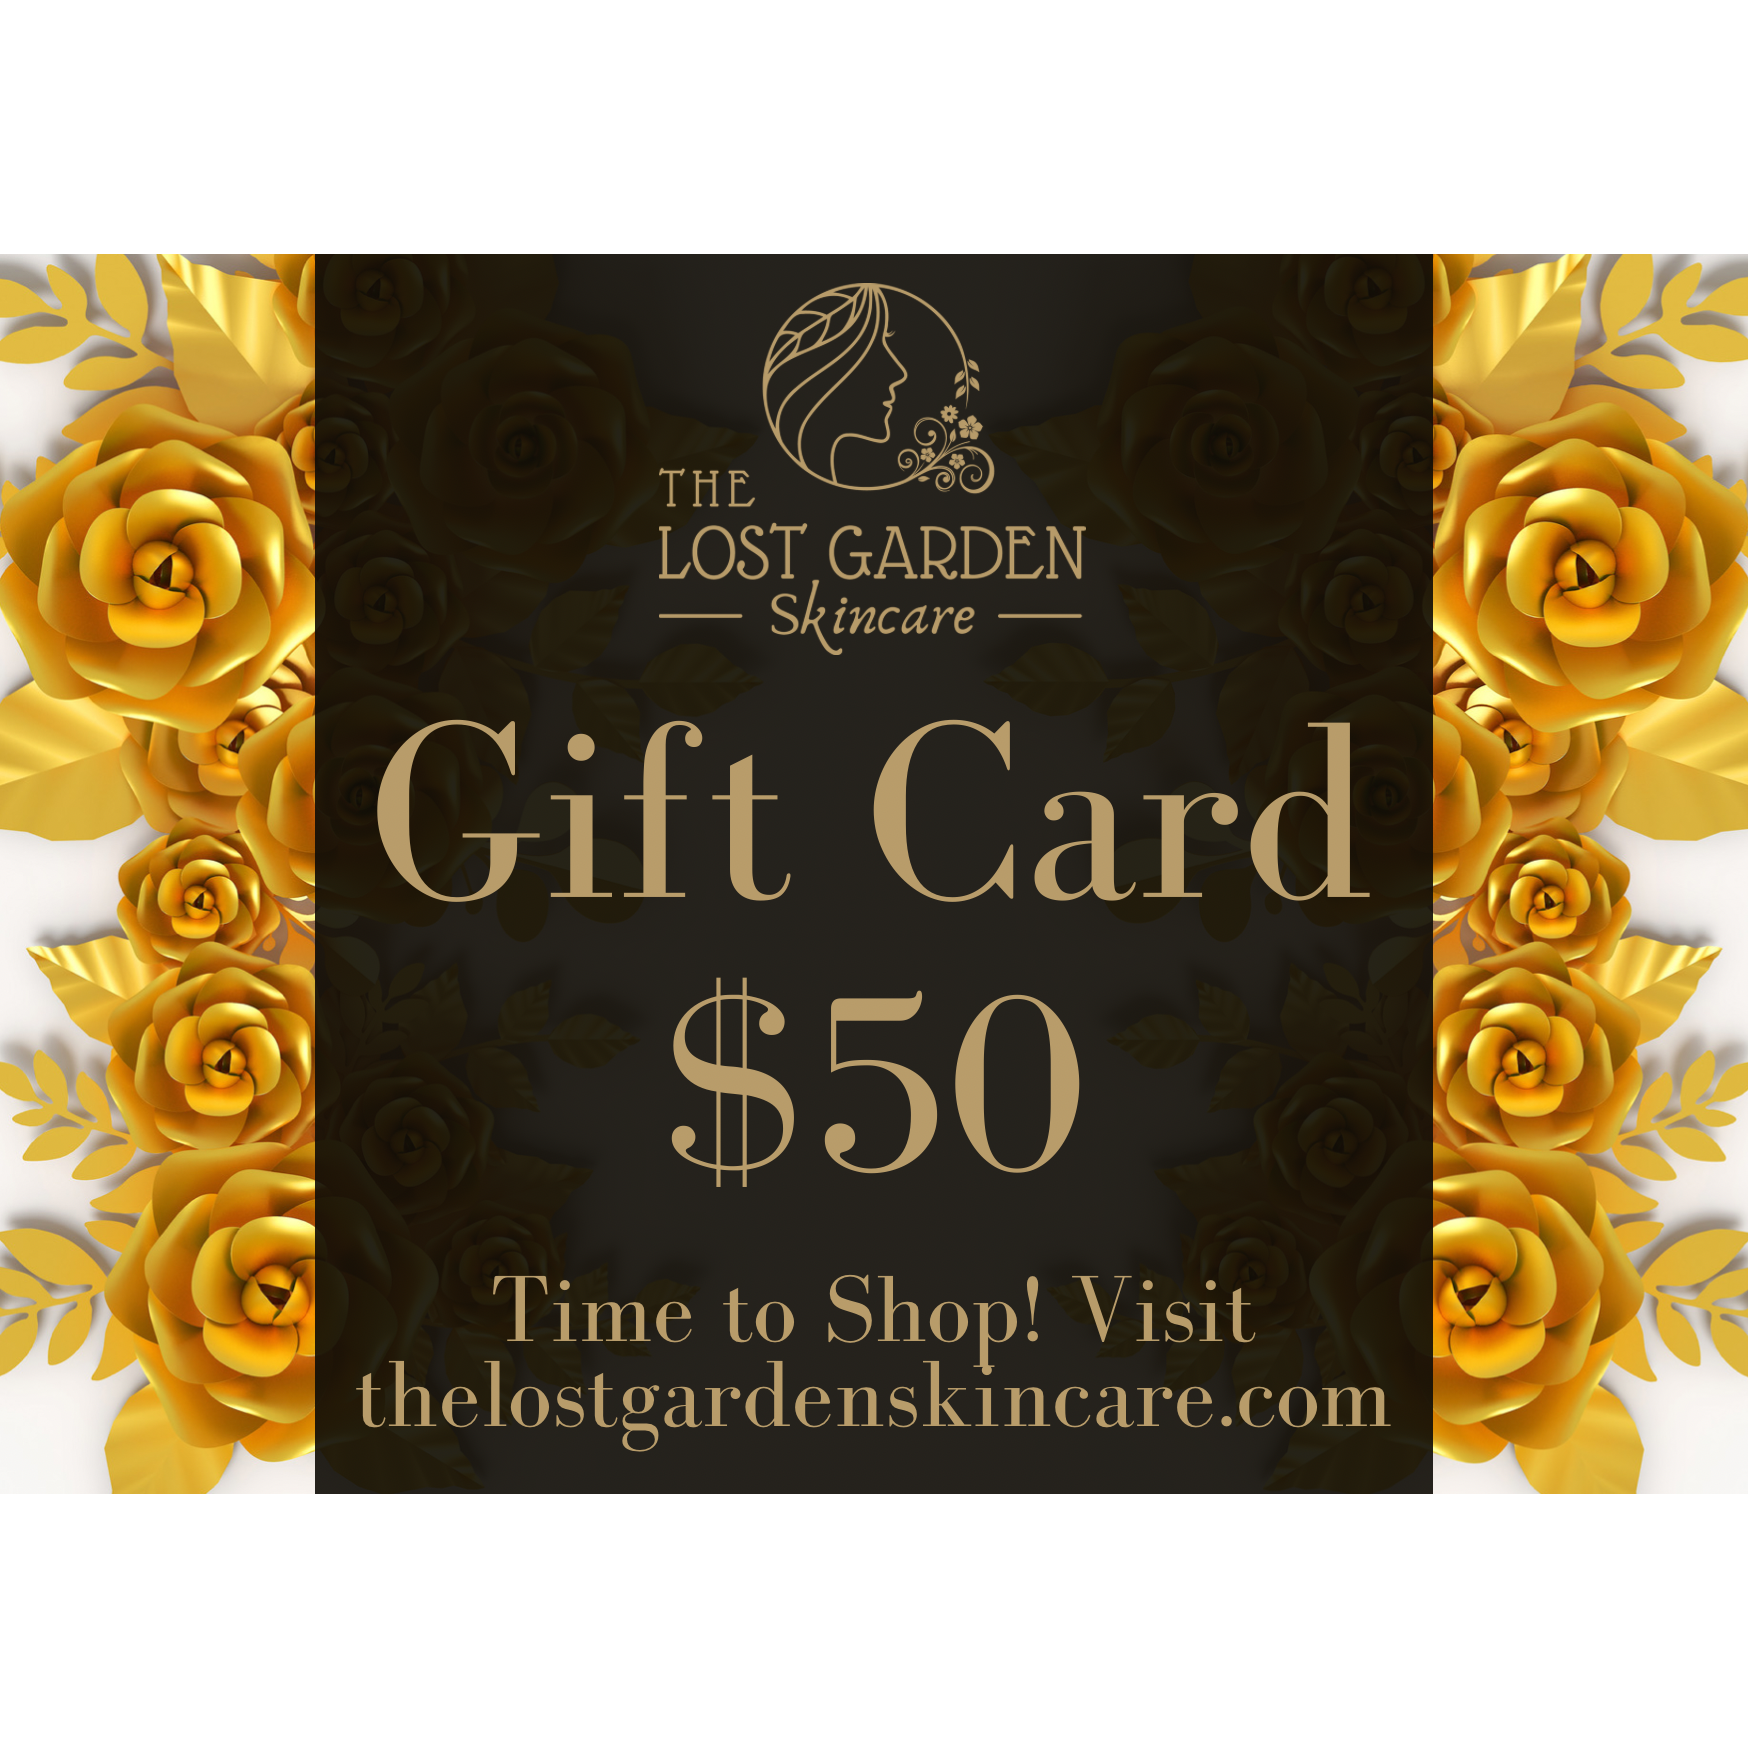 The Lost Garden Gift Card